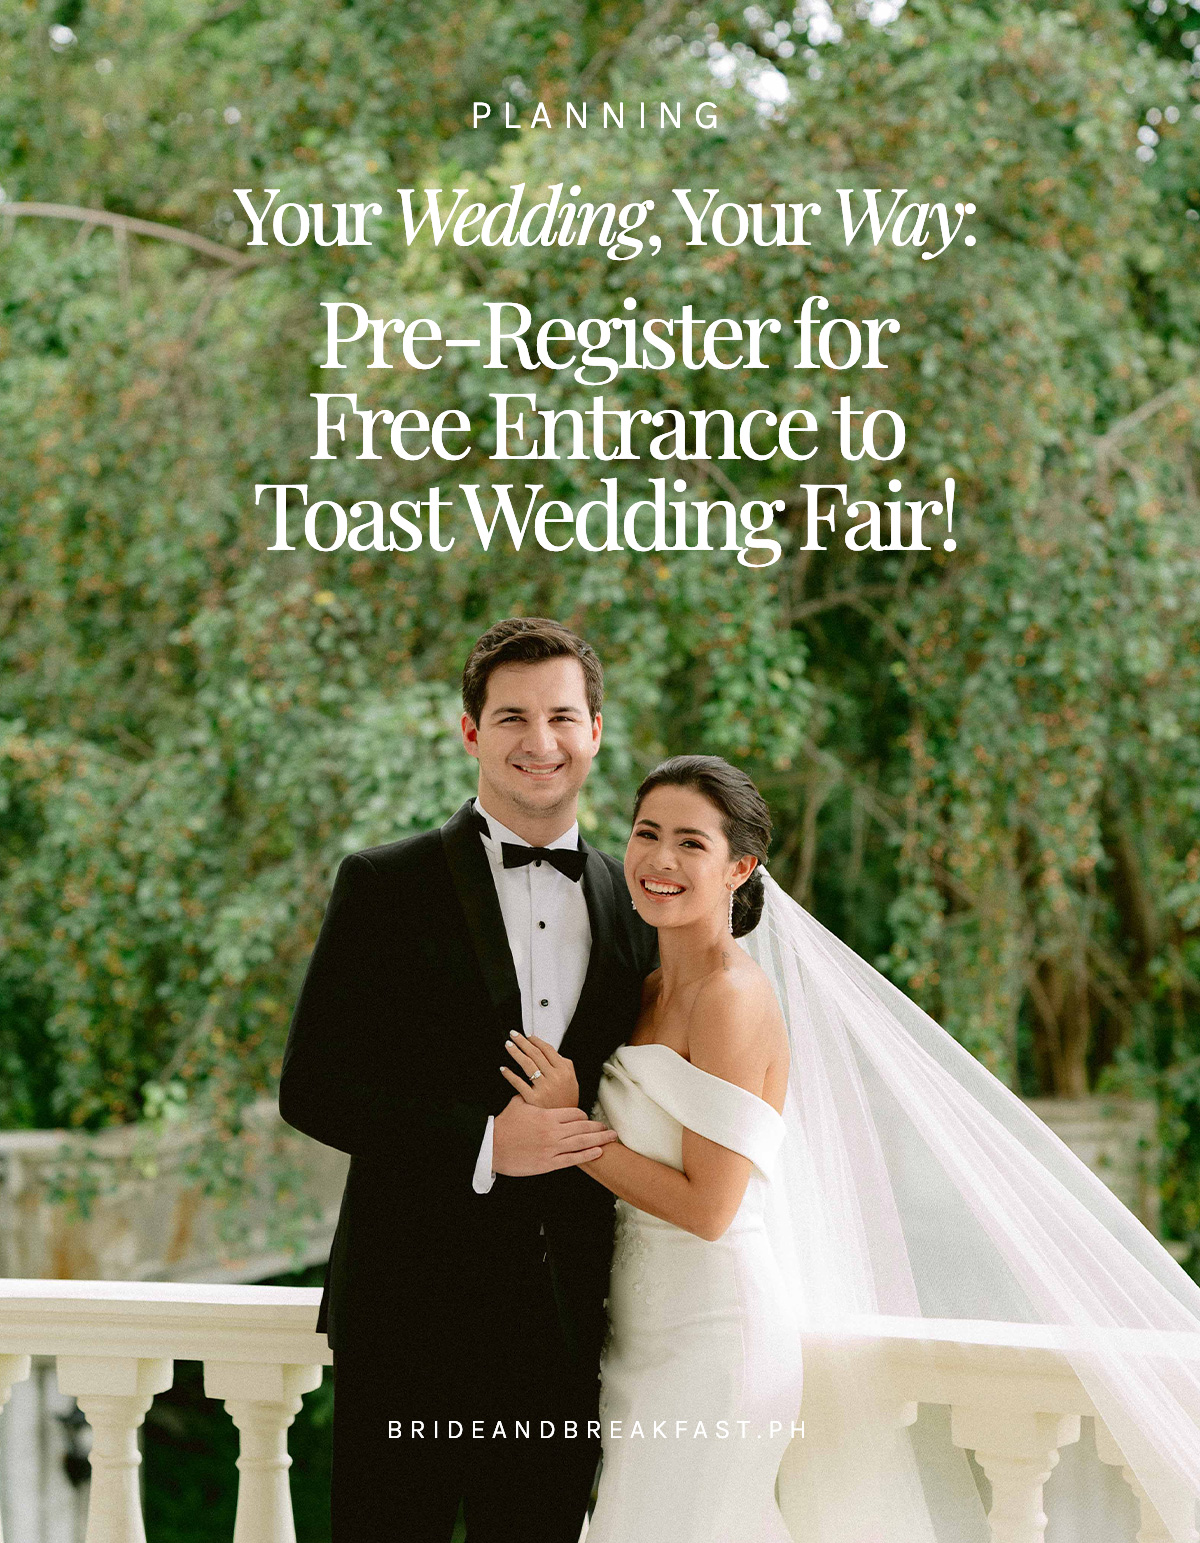 Your Wedding, Your Way: Pre-Register for Free Entrance to Toast Wedding Fair